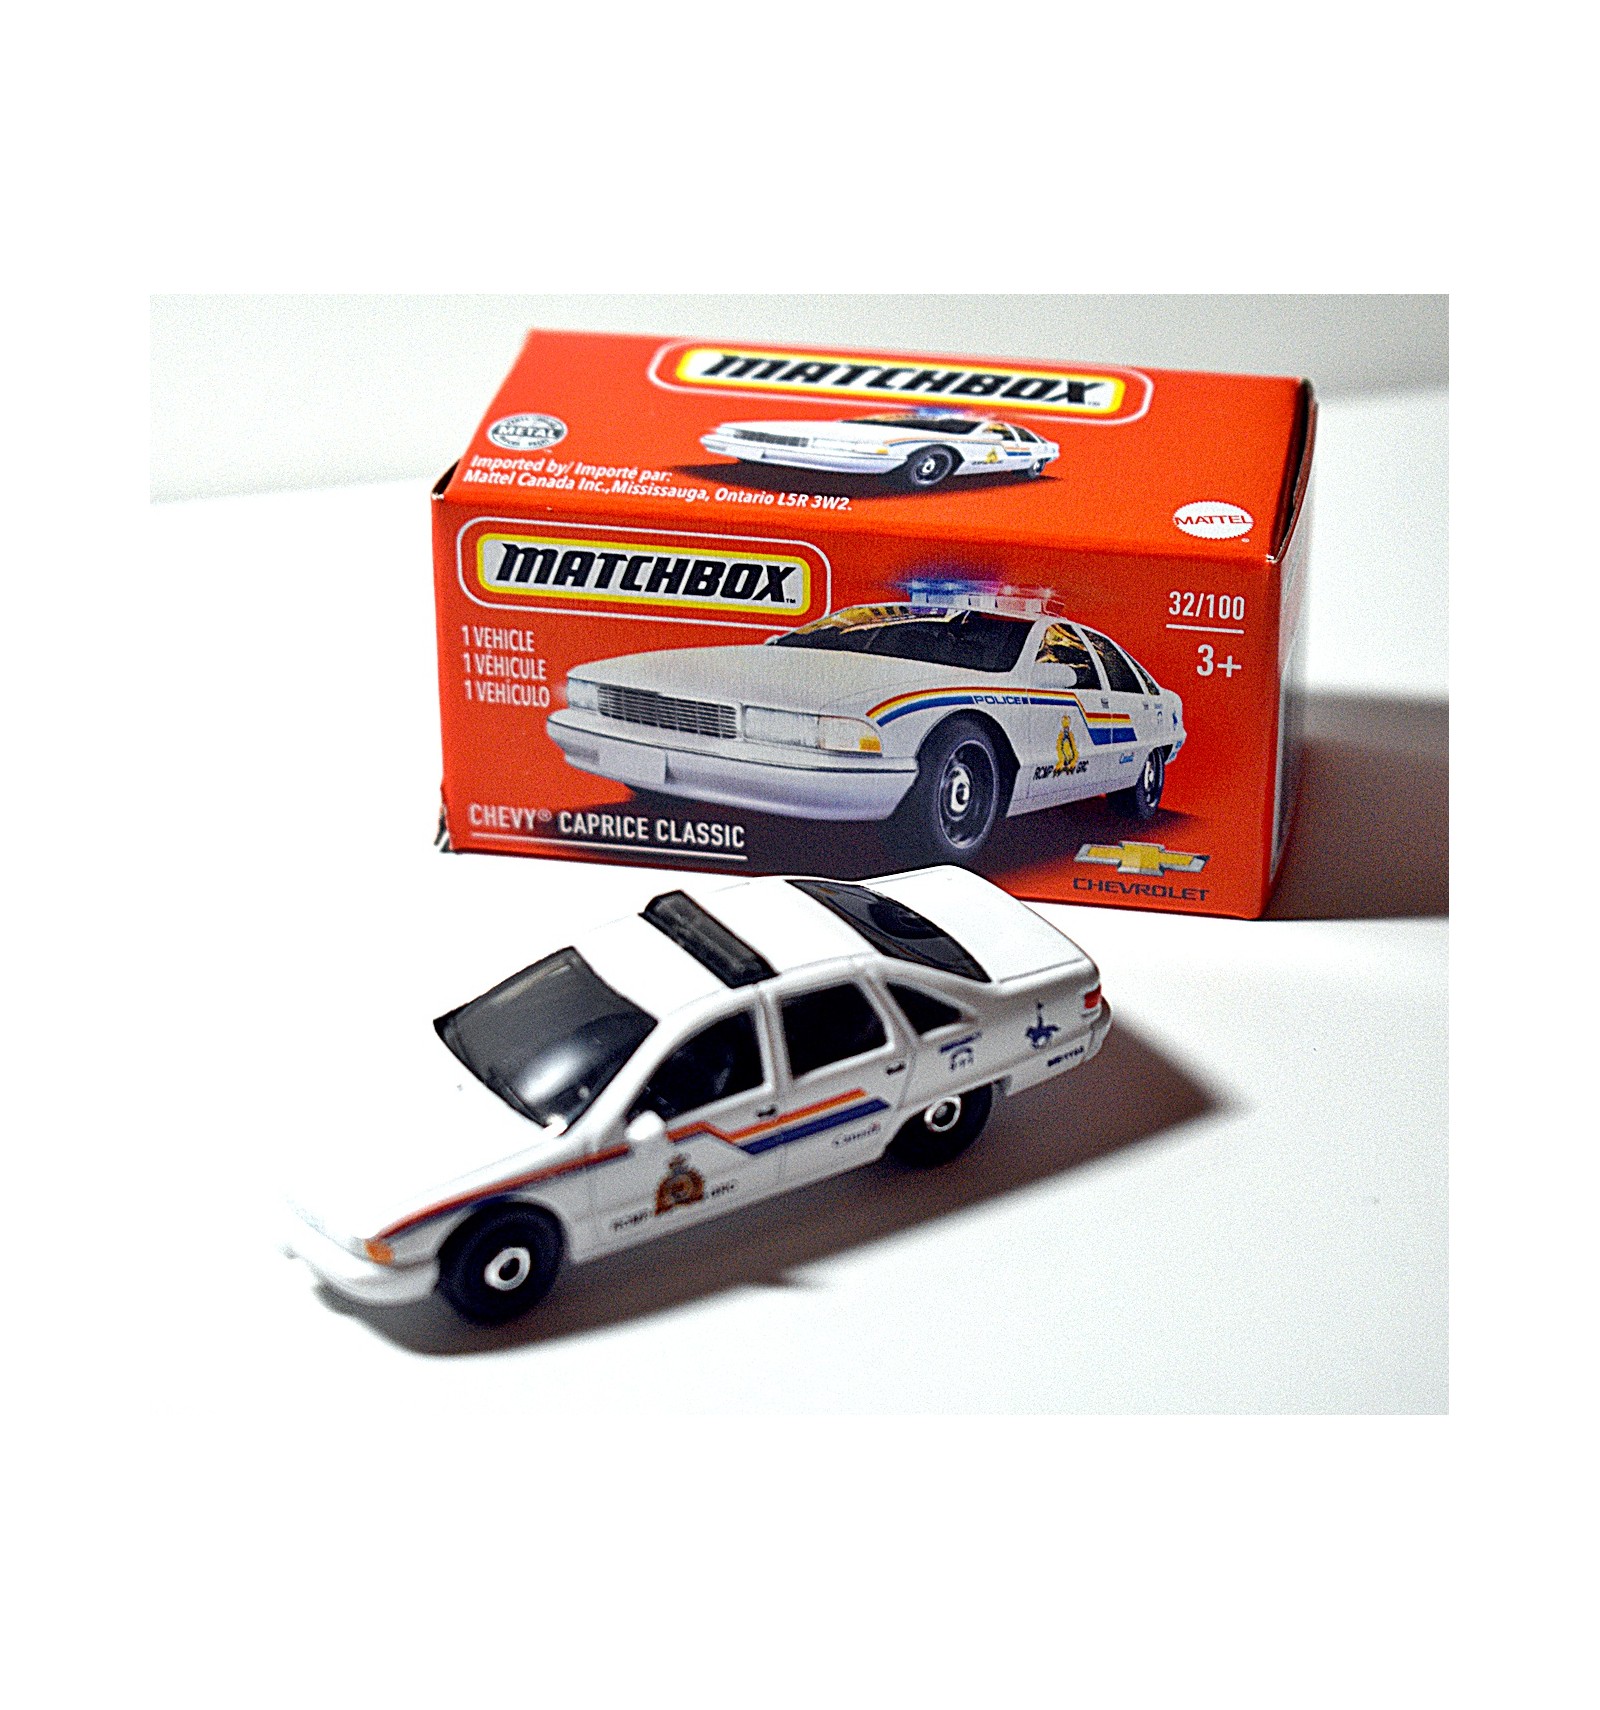 2021 MATCHBOX CHEVY CAPRICE CLASSIC 32/100 CANADA POLICE CAR DIECAST COLLECTION 